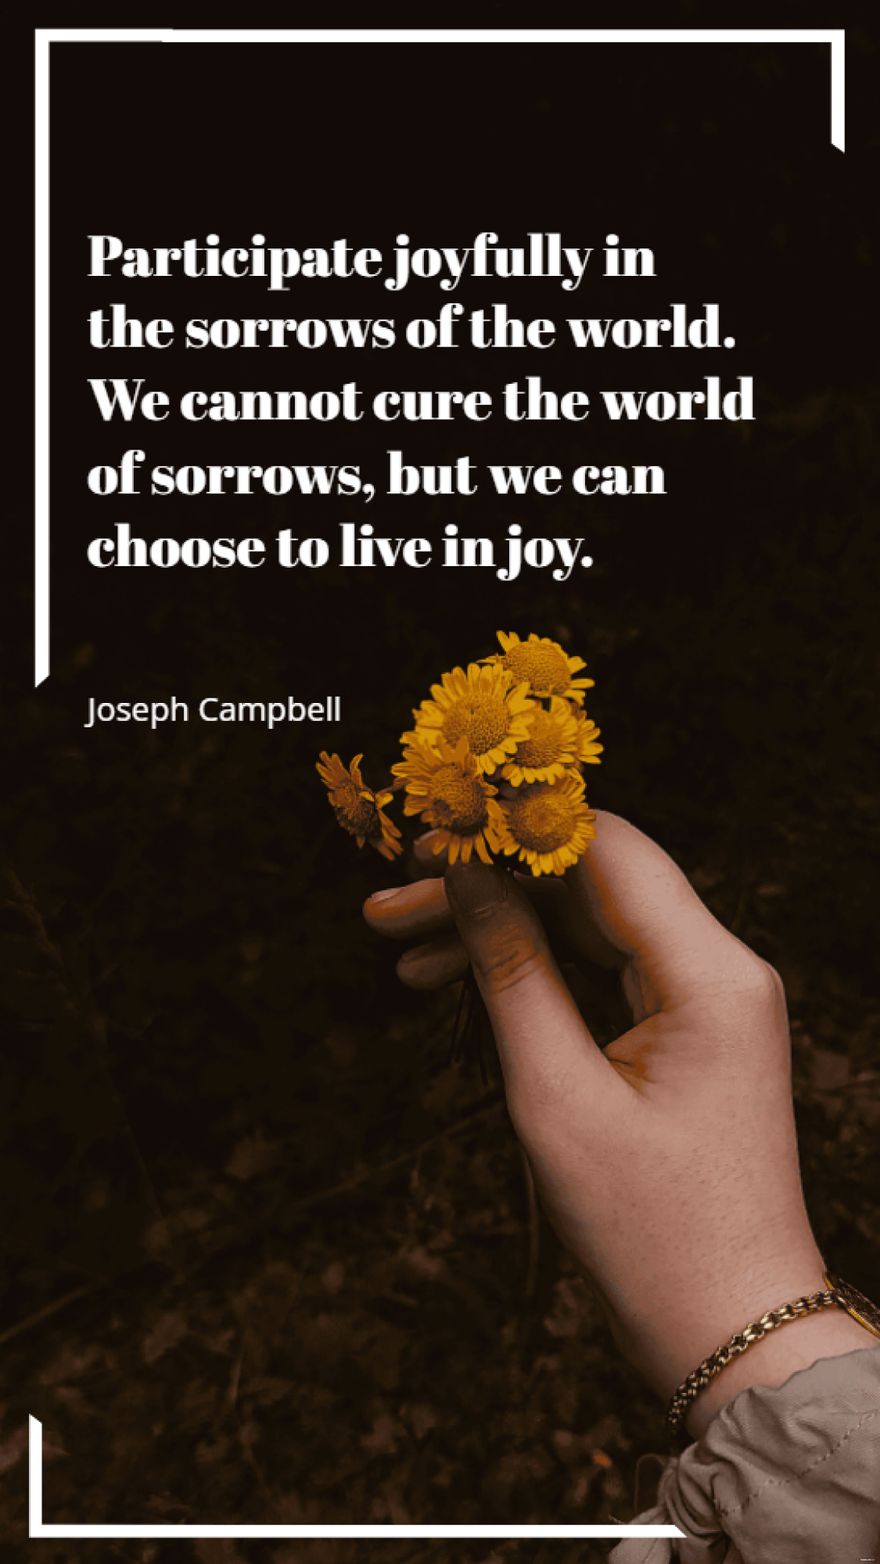 Joseph Campbell - Participate joyfully in the sorrows of the world. We cannot cure the world of sorrows, but we can choose to live in joy.